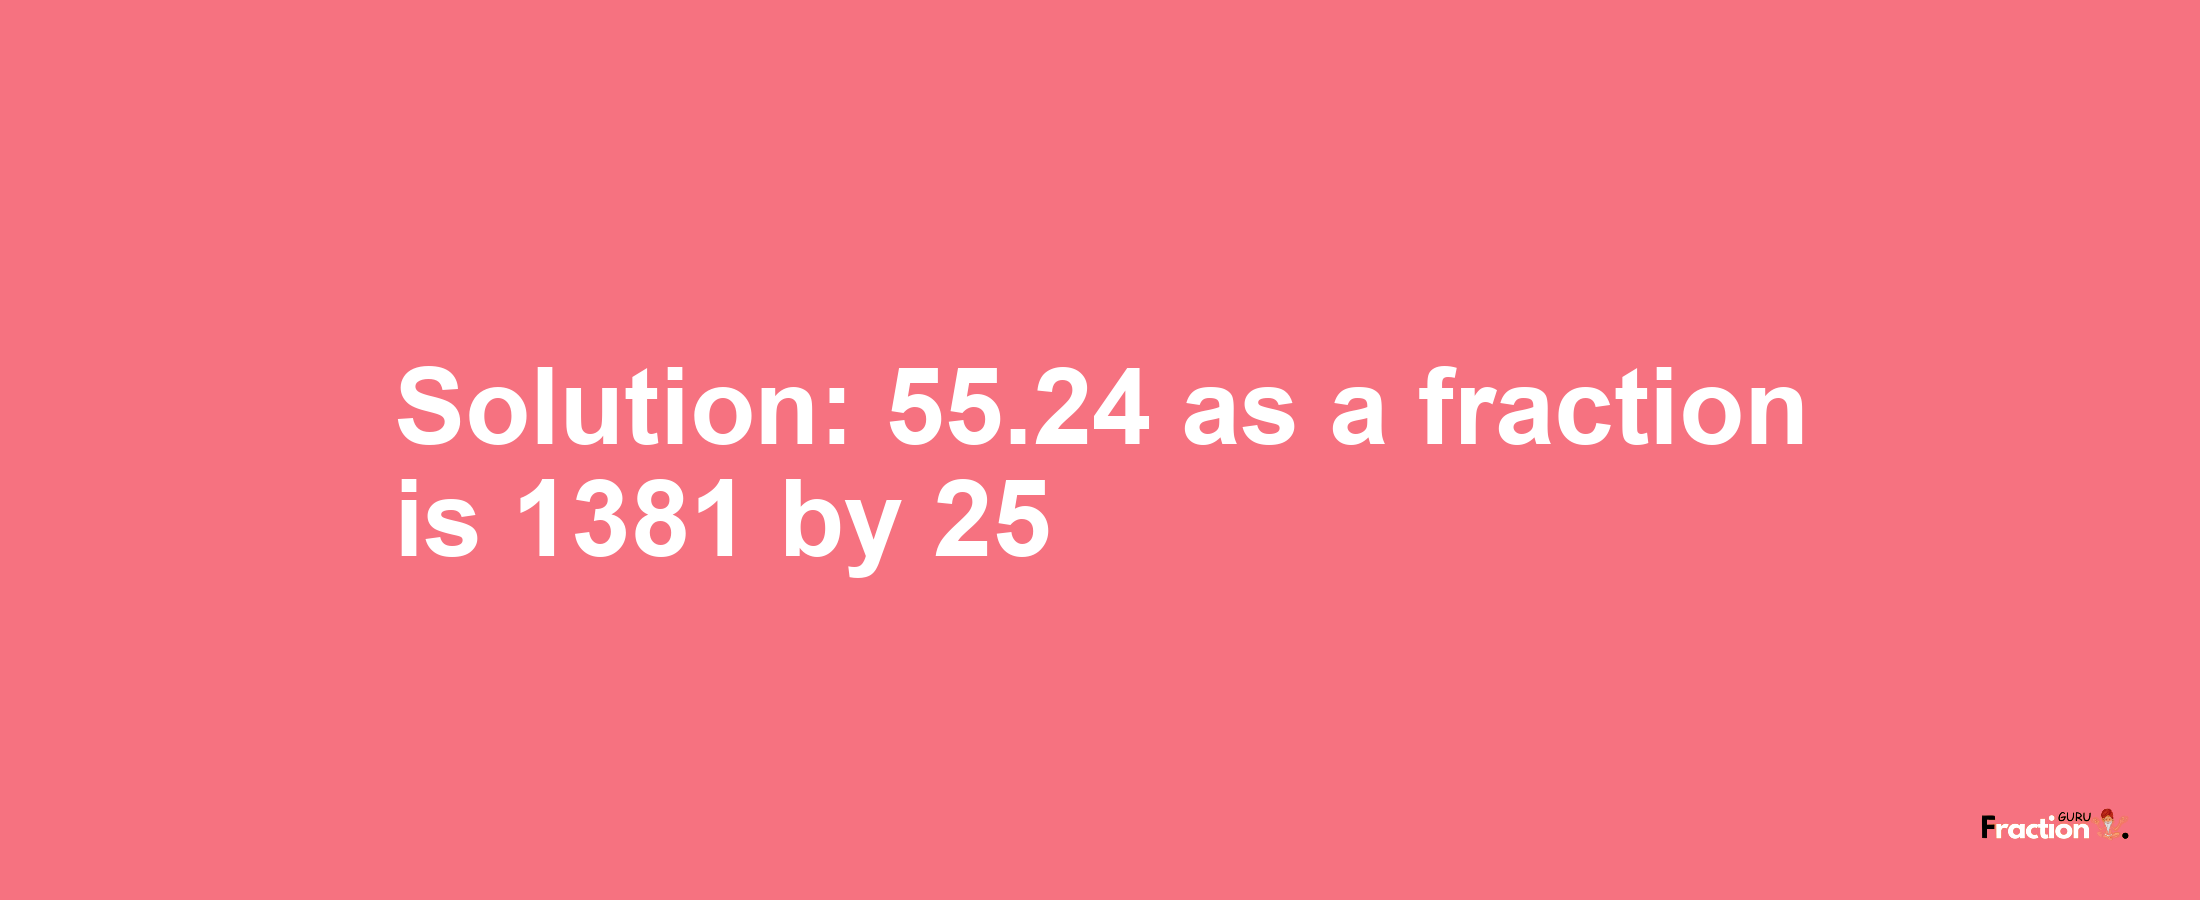 Solution:55.24 as a fraction is 1381/25